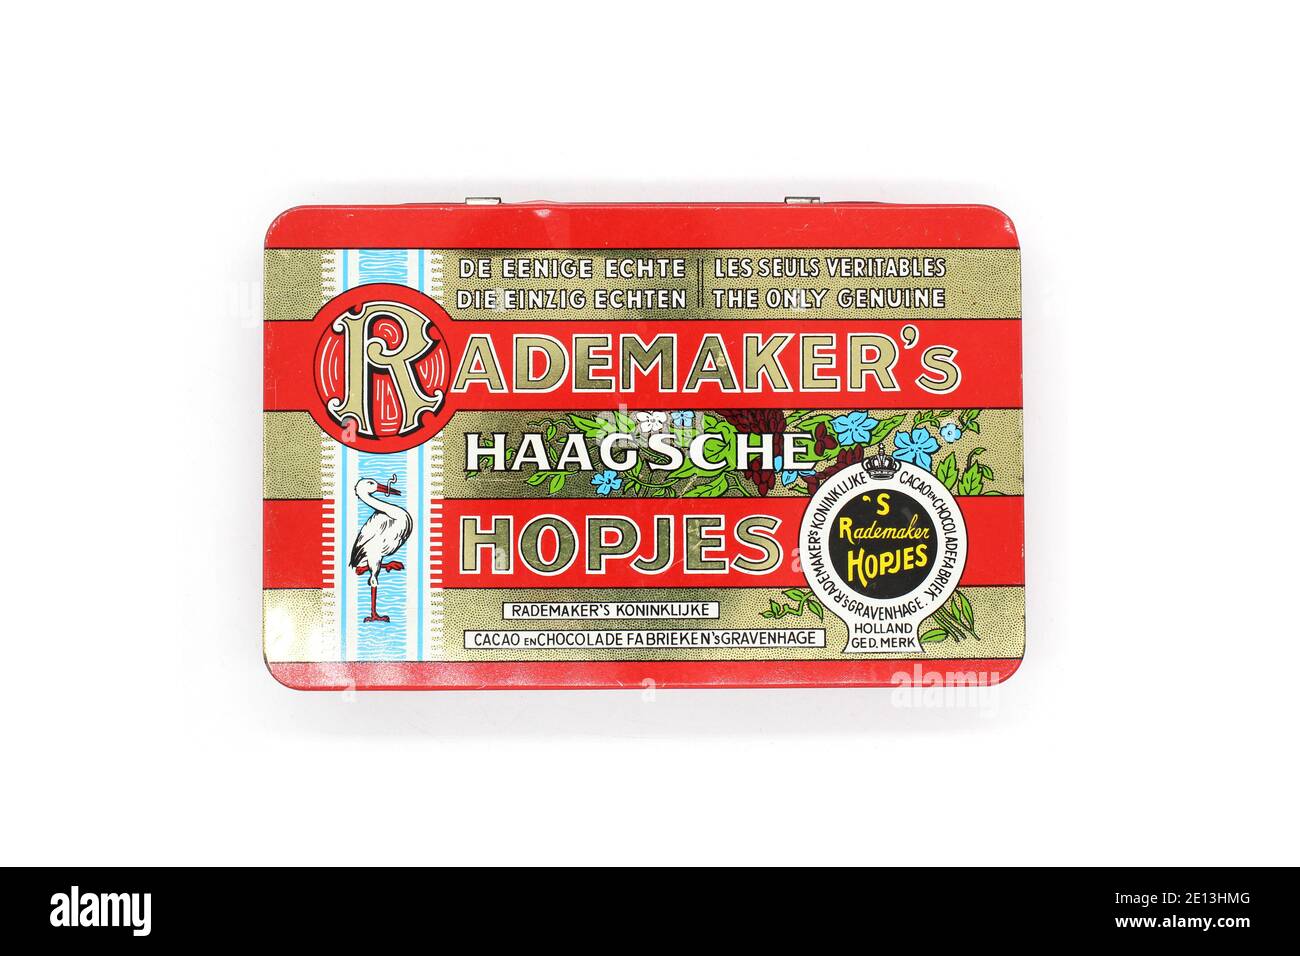 Vintage Rademaker's Haagsche Hopjes metal box, isolated on a white background Stock Photo